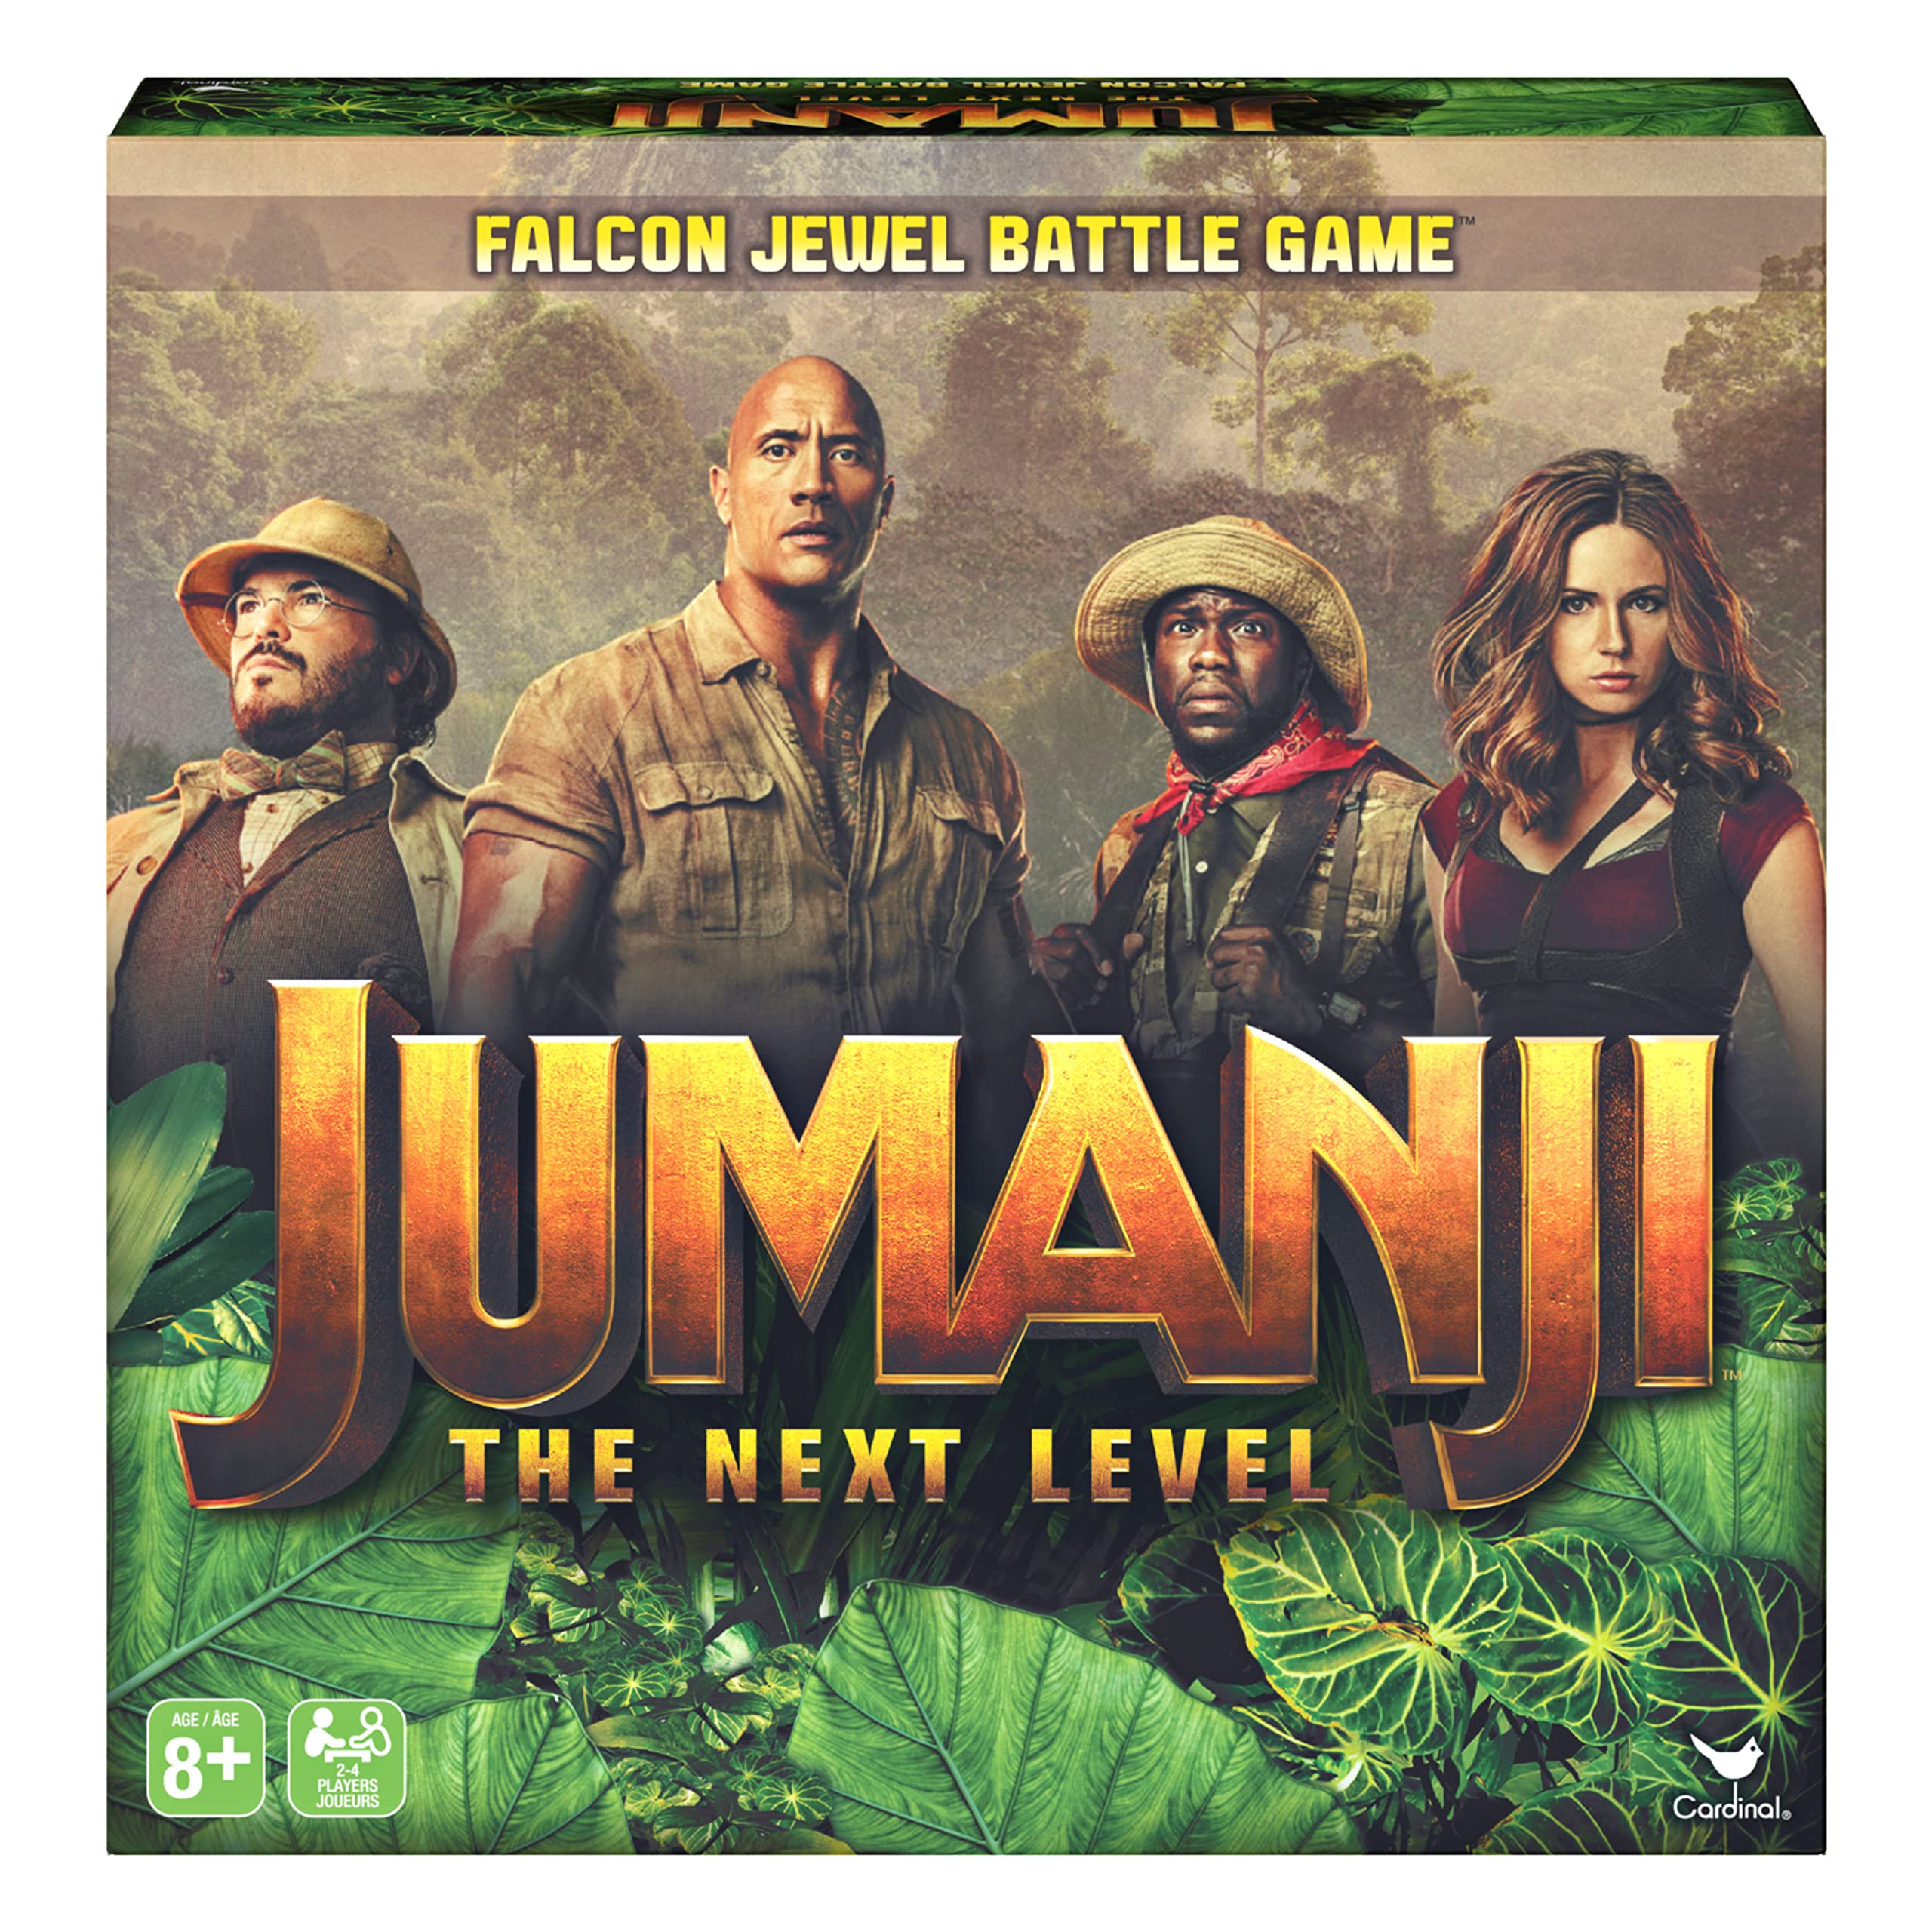 Jumanji 3 The Next Level, Falcon Jewel Battle Board Game for Kids, Families, and Adults